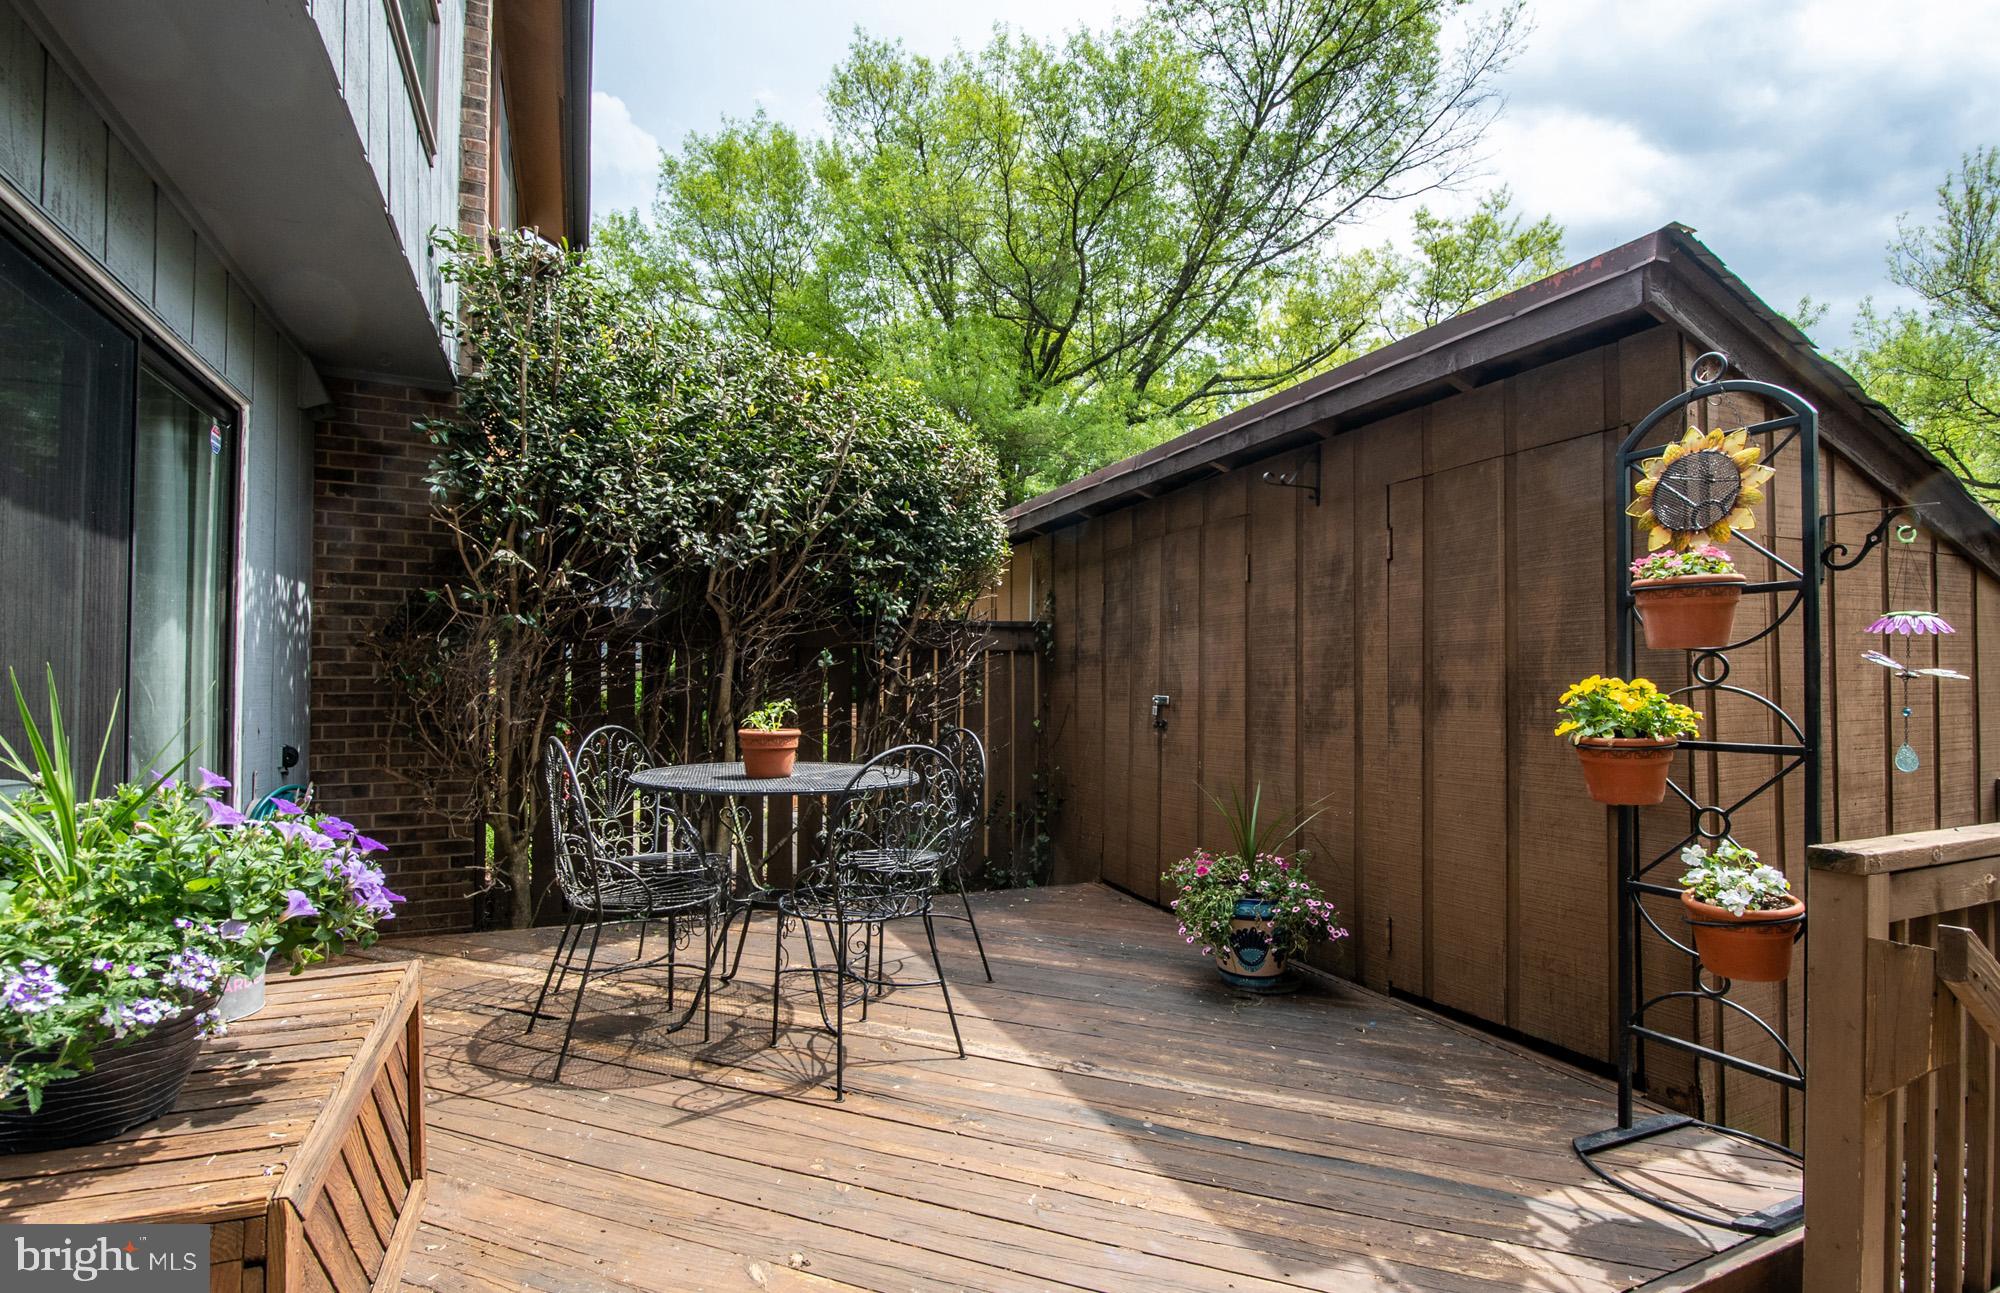 a view of backyard with a table and chairs and potted plants